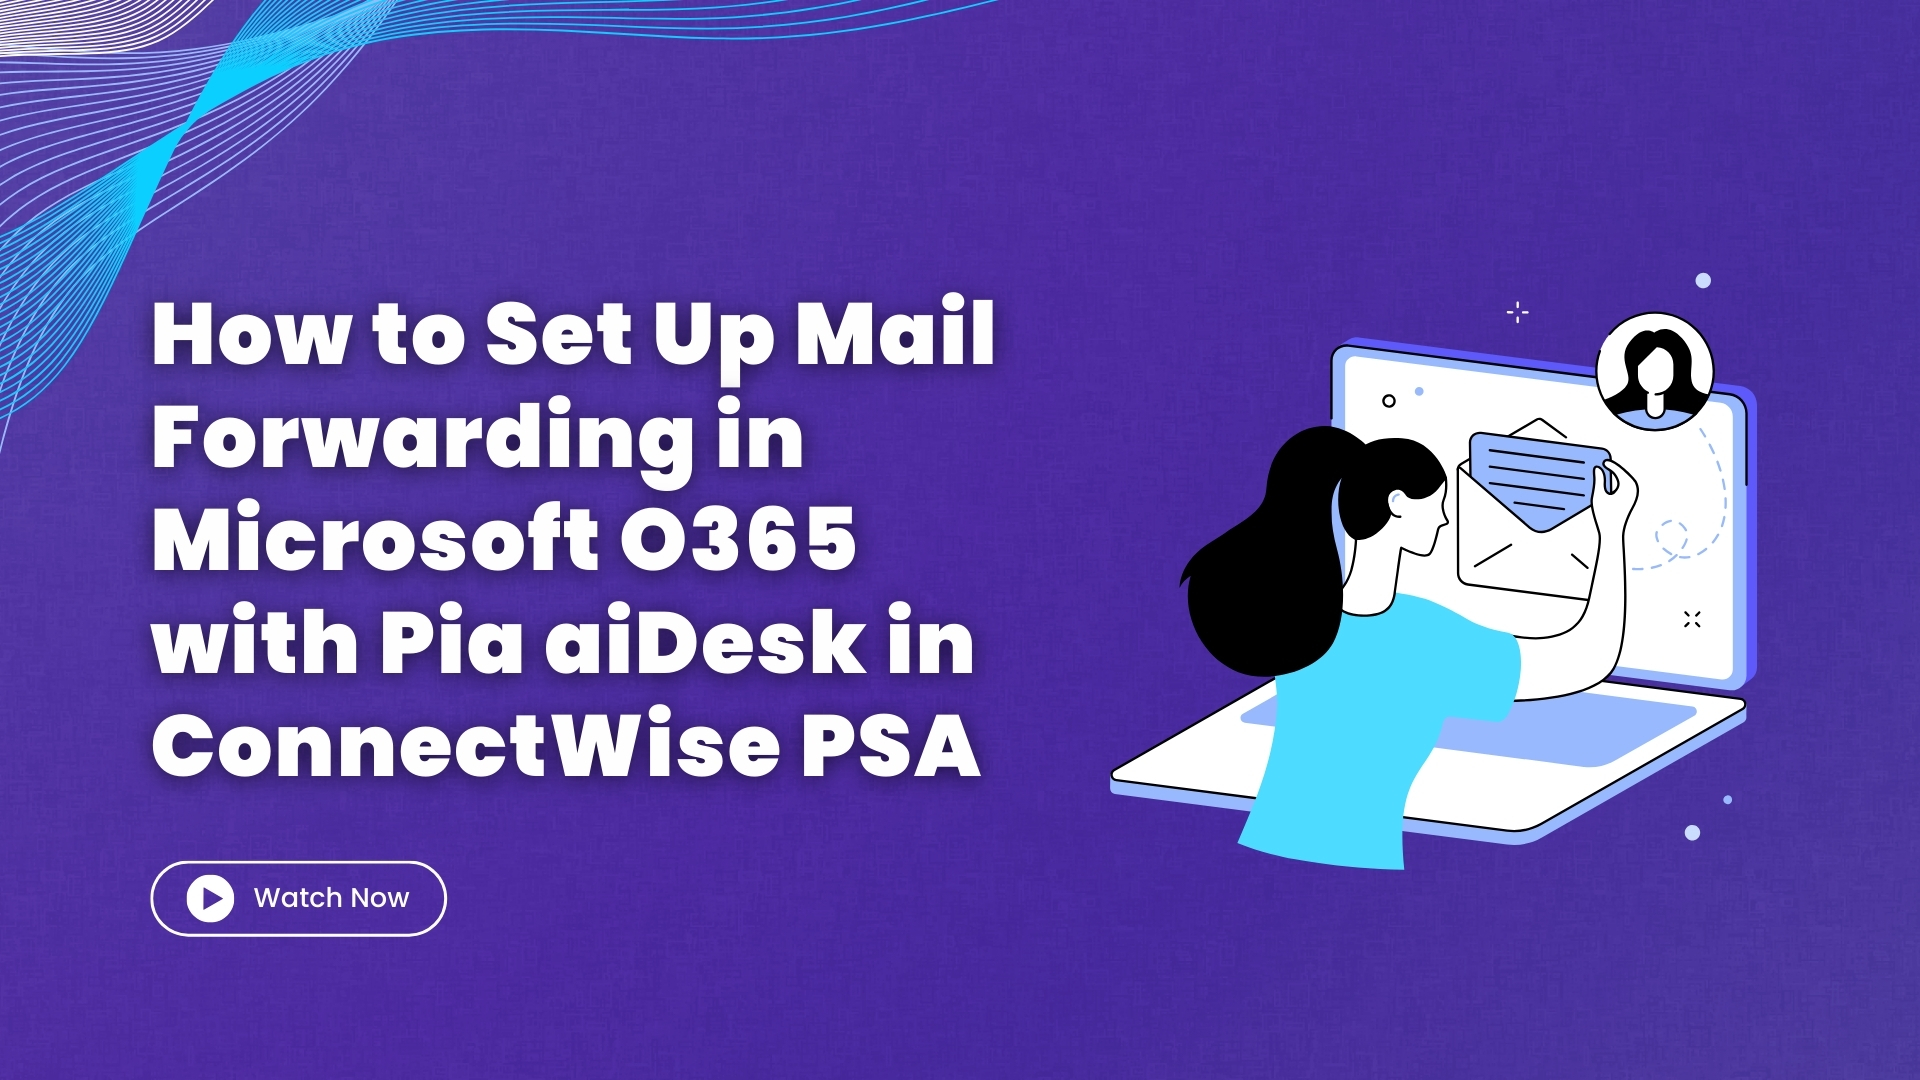 How to Set Up Mail Forwarding in Microsoft O365 with Pia aiDesk in ConnectWise PSA